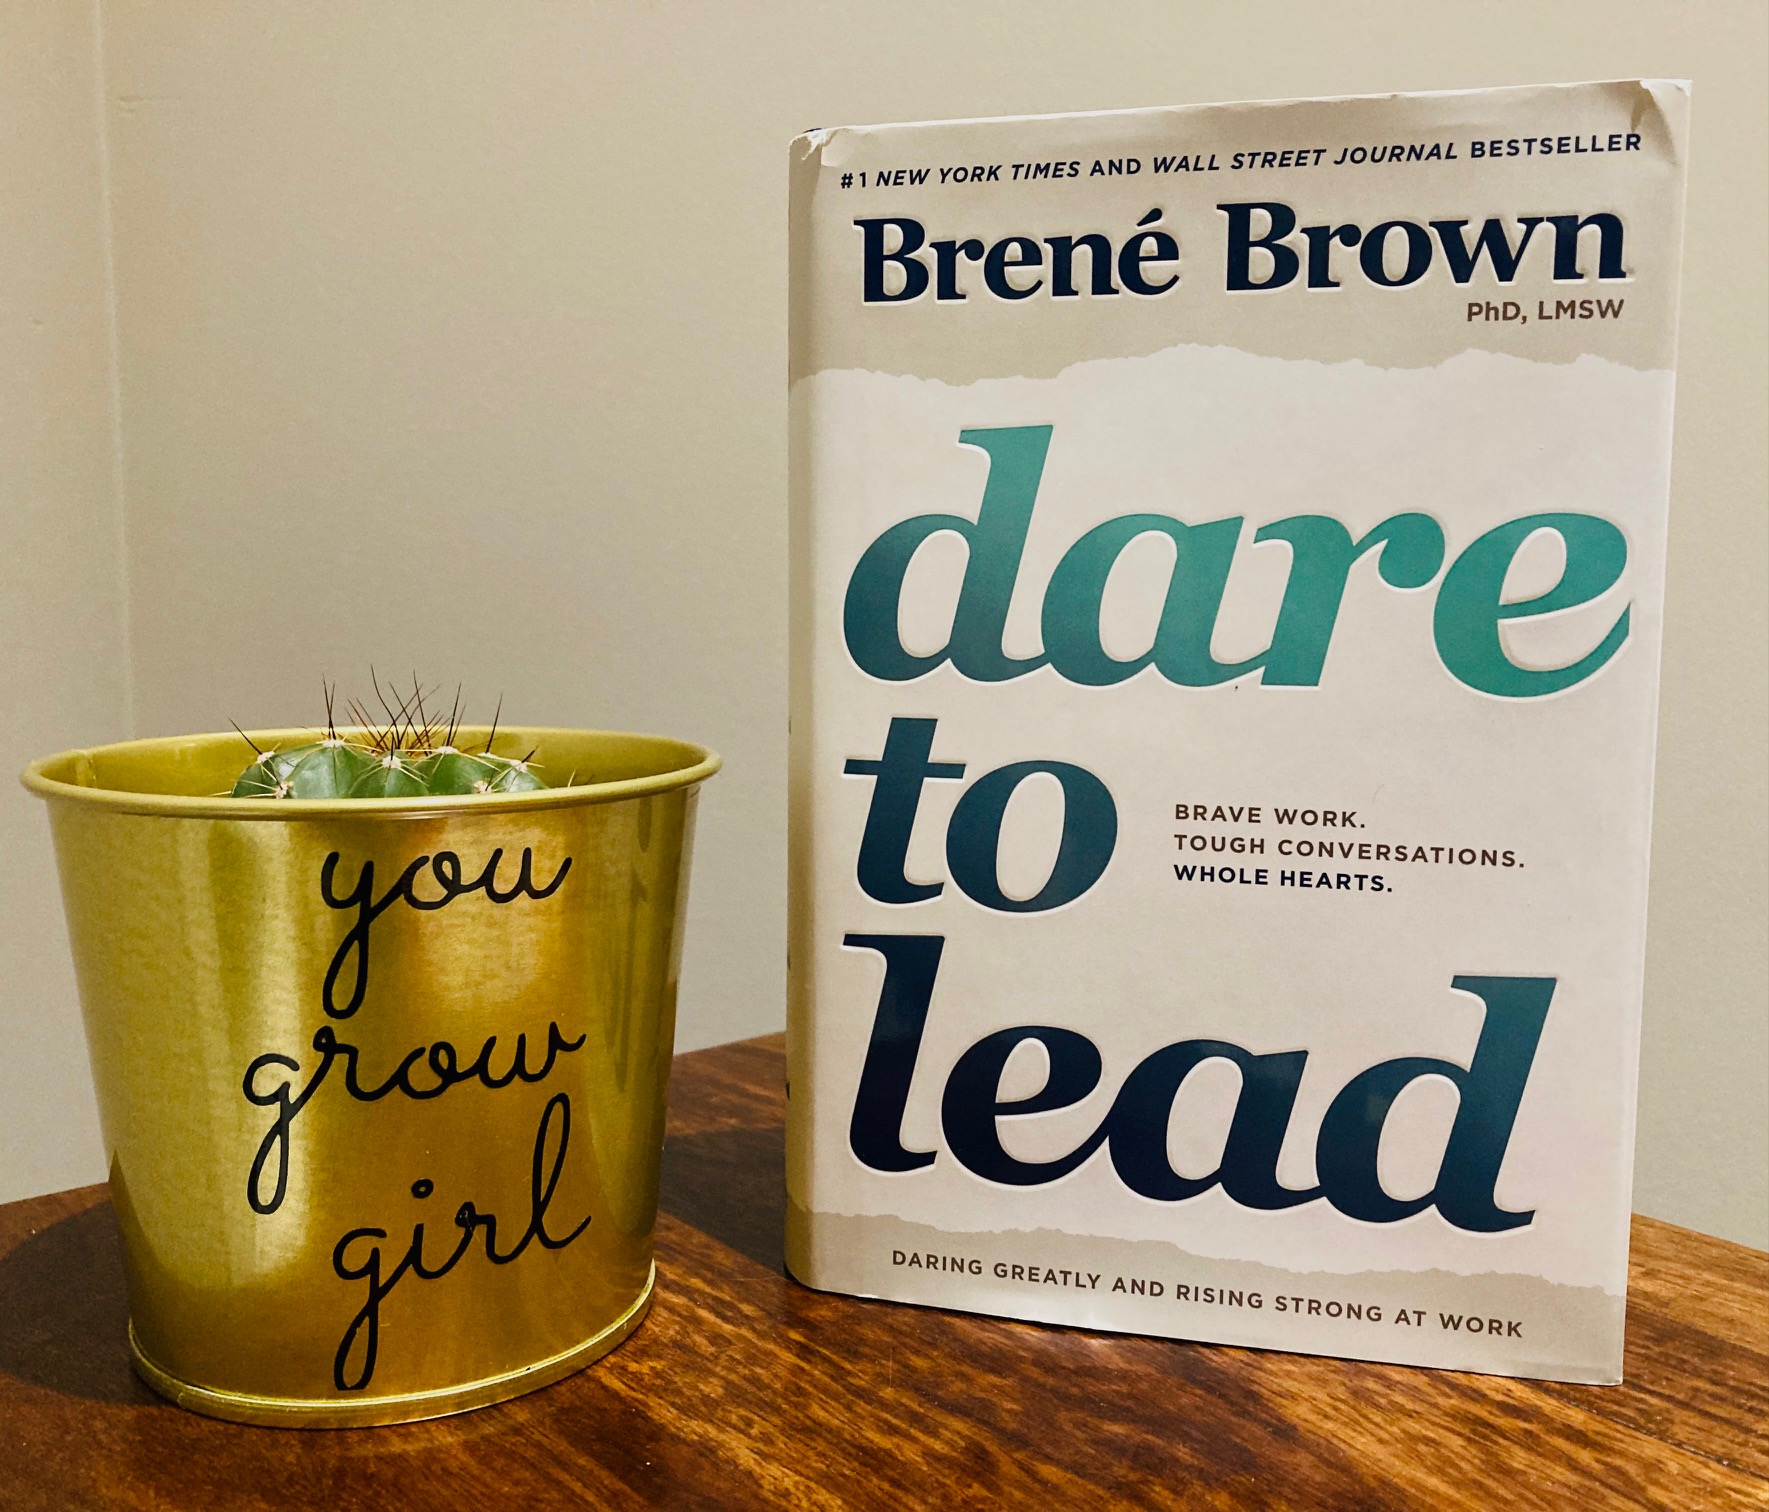 Dare to Lead by Brene Brown book pictured next to a cactus standing on a wooden surface